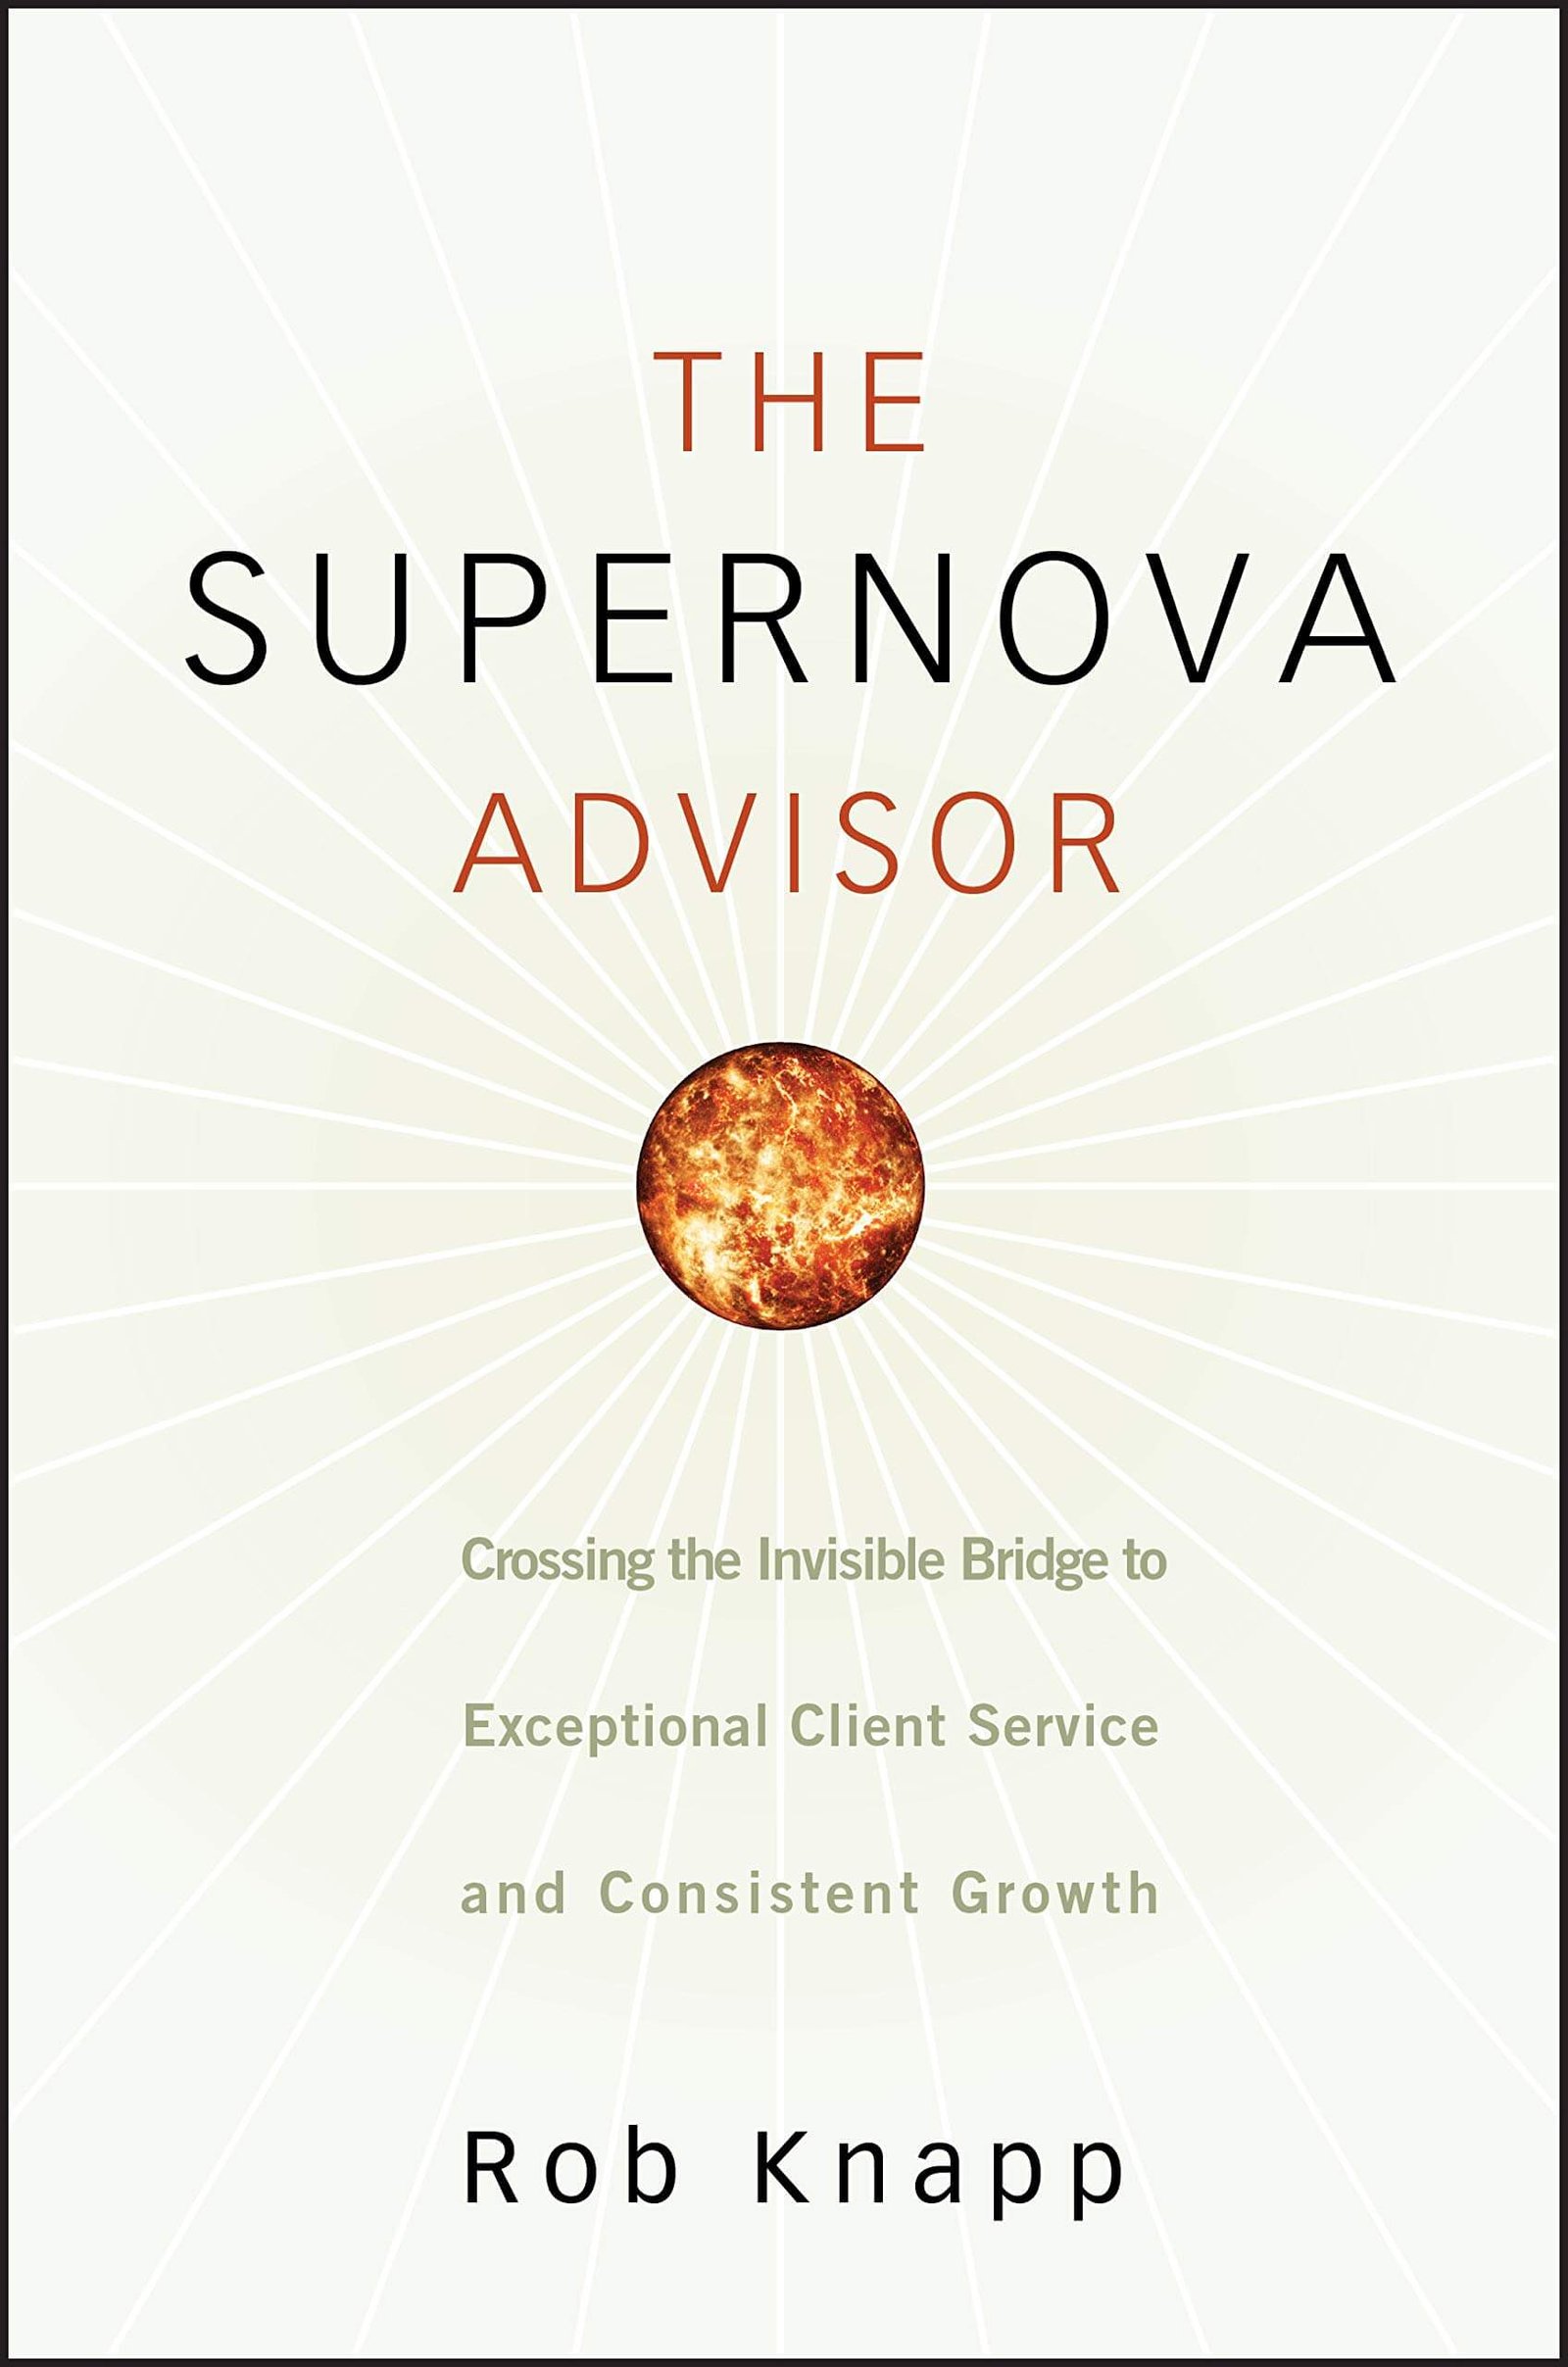 The Supernova Advisor: Crossing the Invisible Bridge to Exceptional Client Service and Consistent Growth by Robert D. Knapp